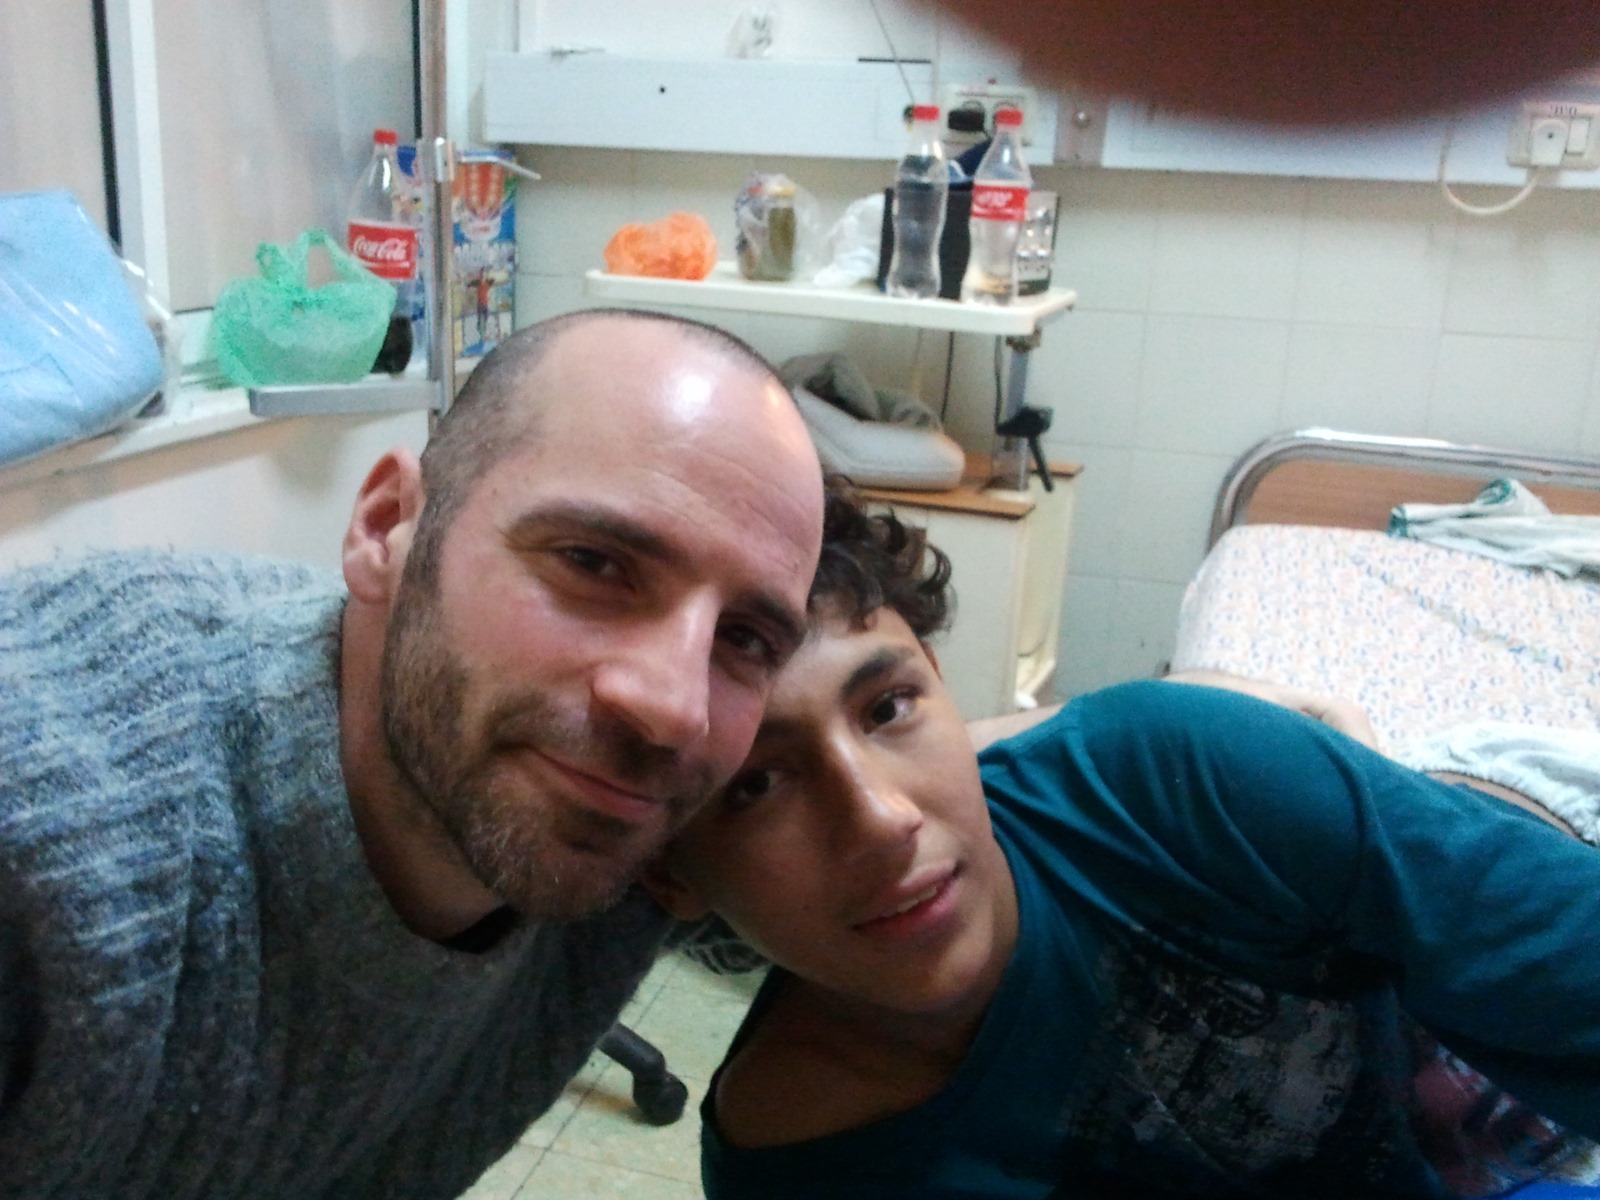 Ronnie Barkan takes a selfie with Mohammed Al Zaza while he is in hospital. They are both smiling and leaning toward each other.